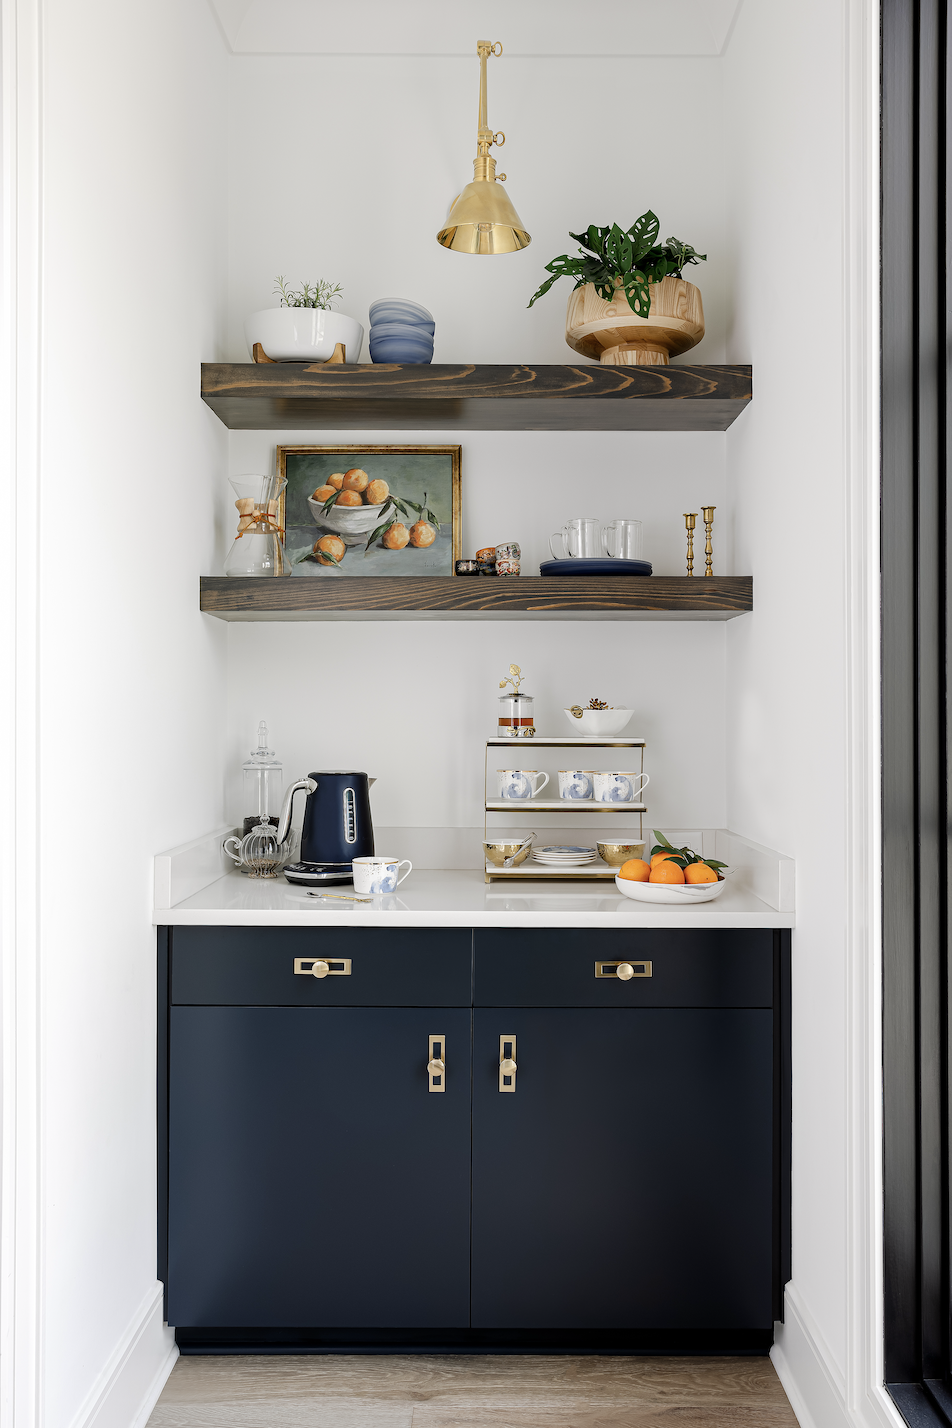 9 Home Coffee Bar Ideas for Your Space